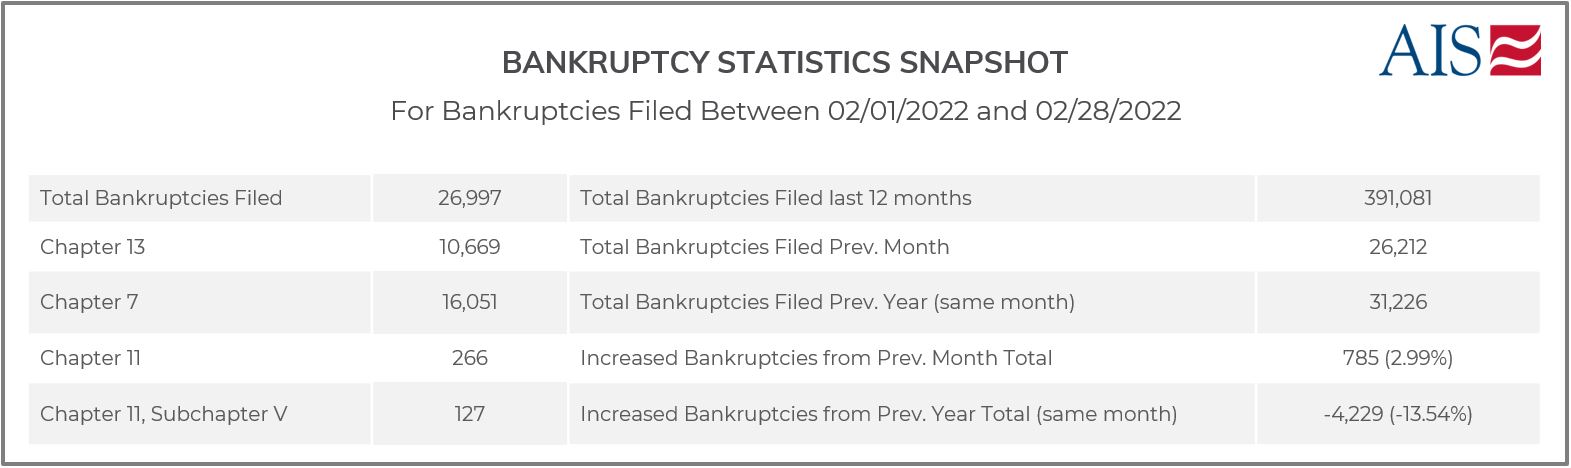 AIS Insight_February 2022_BANKRUPTCY STATISTICS SNAPSHOT (TABLE)-1